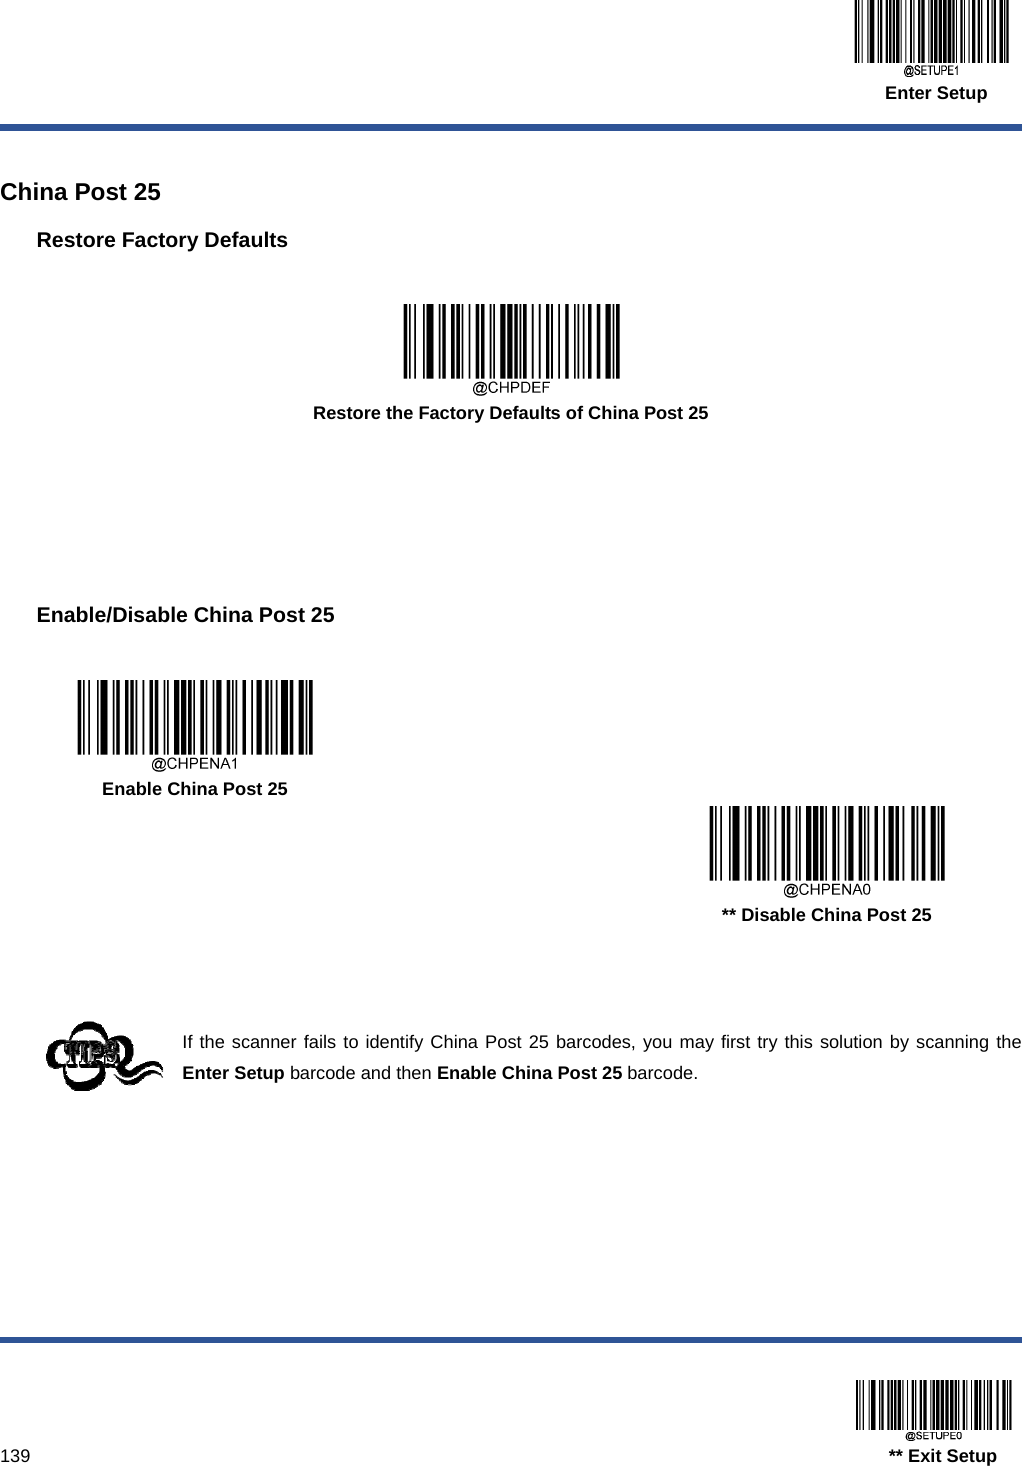  Enter Setup  139                                                                                   ** Exit Setup  China Post 25 Restore Factory Defaults   Restore the Factory Defaults of China Post 25      Enable/Disable China Post 25     Enable China Post 25      ** Disable China Post 25    If the scanner fails to identify China Post 25 barcodes, you may first try this solution by scanning the Enter Setup barcode and then Enable China Post 25 barcode.  